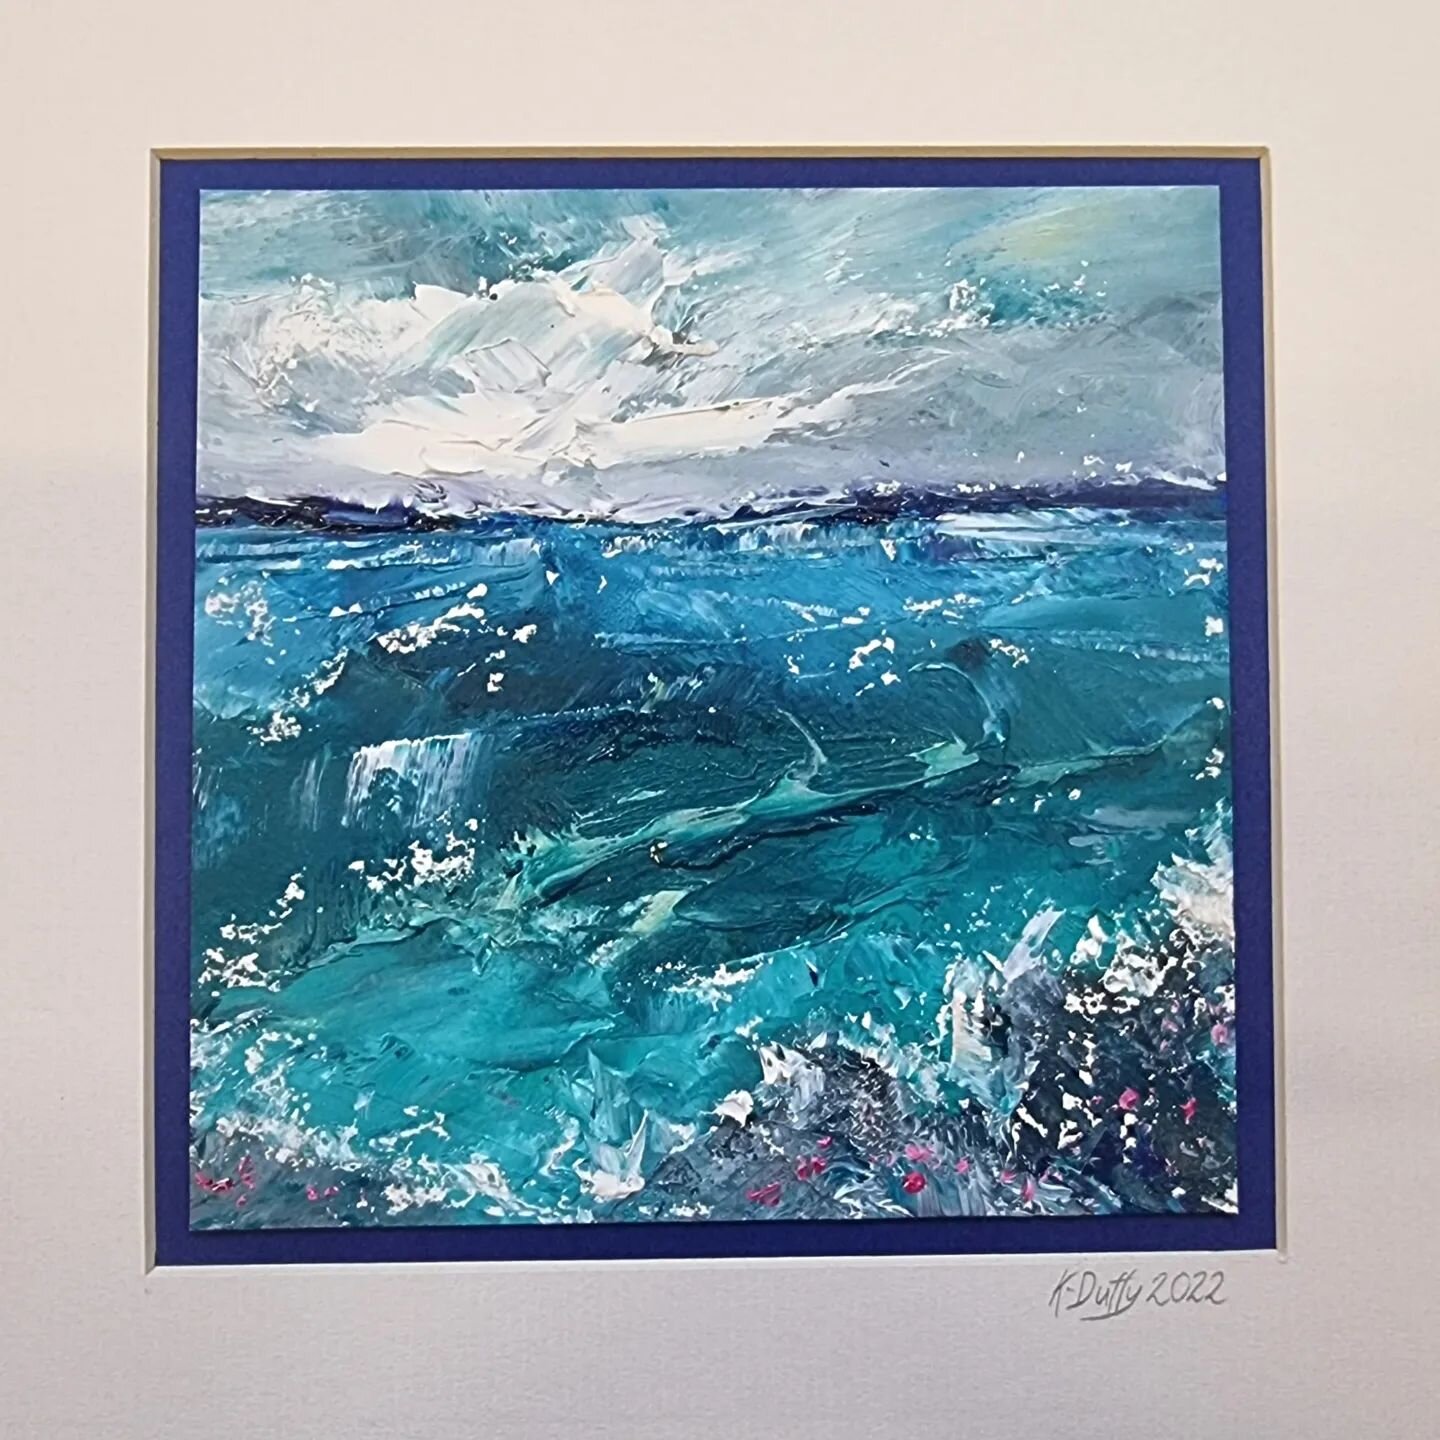 I've sold a few quick sketches in oils recently (13x13cm ish). This one was mounted on a navy blue greetings card and framed in a navy frame to match. Lovely to see what can be done with a simple frame matching the blue card. 
P.s. I actually did a p